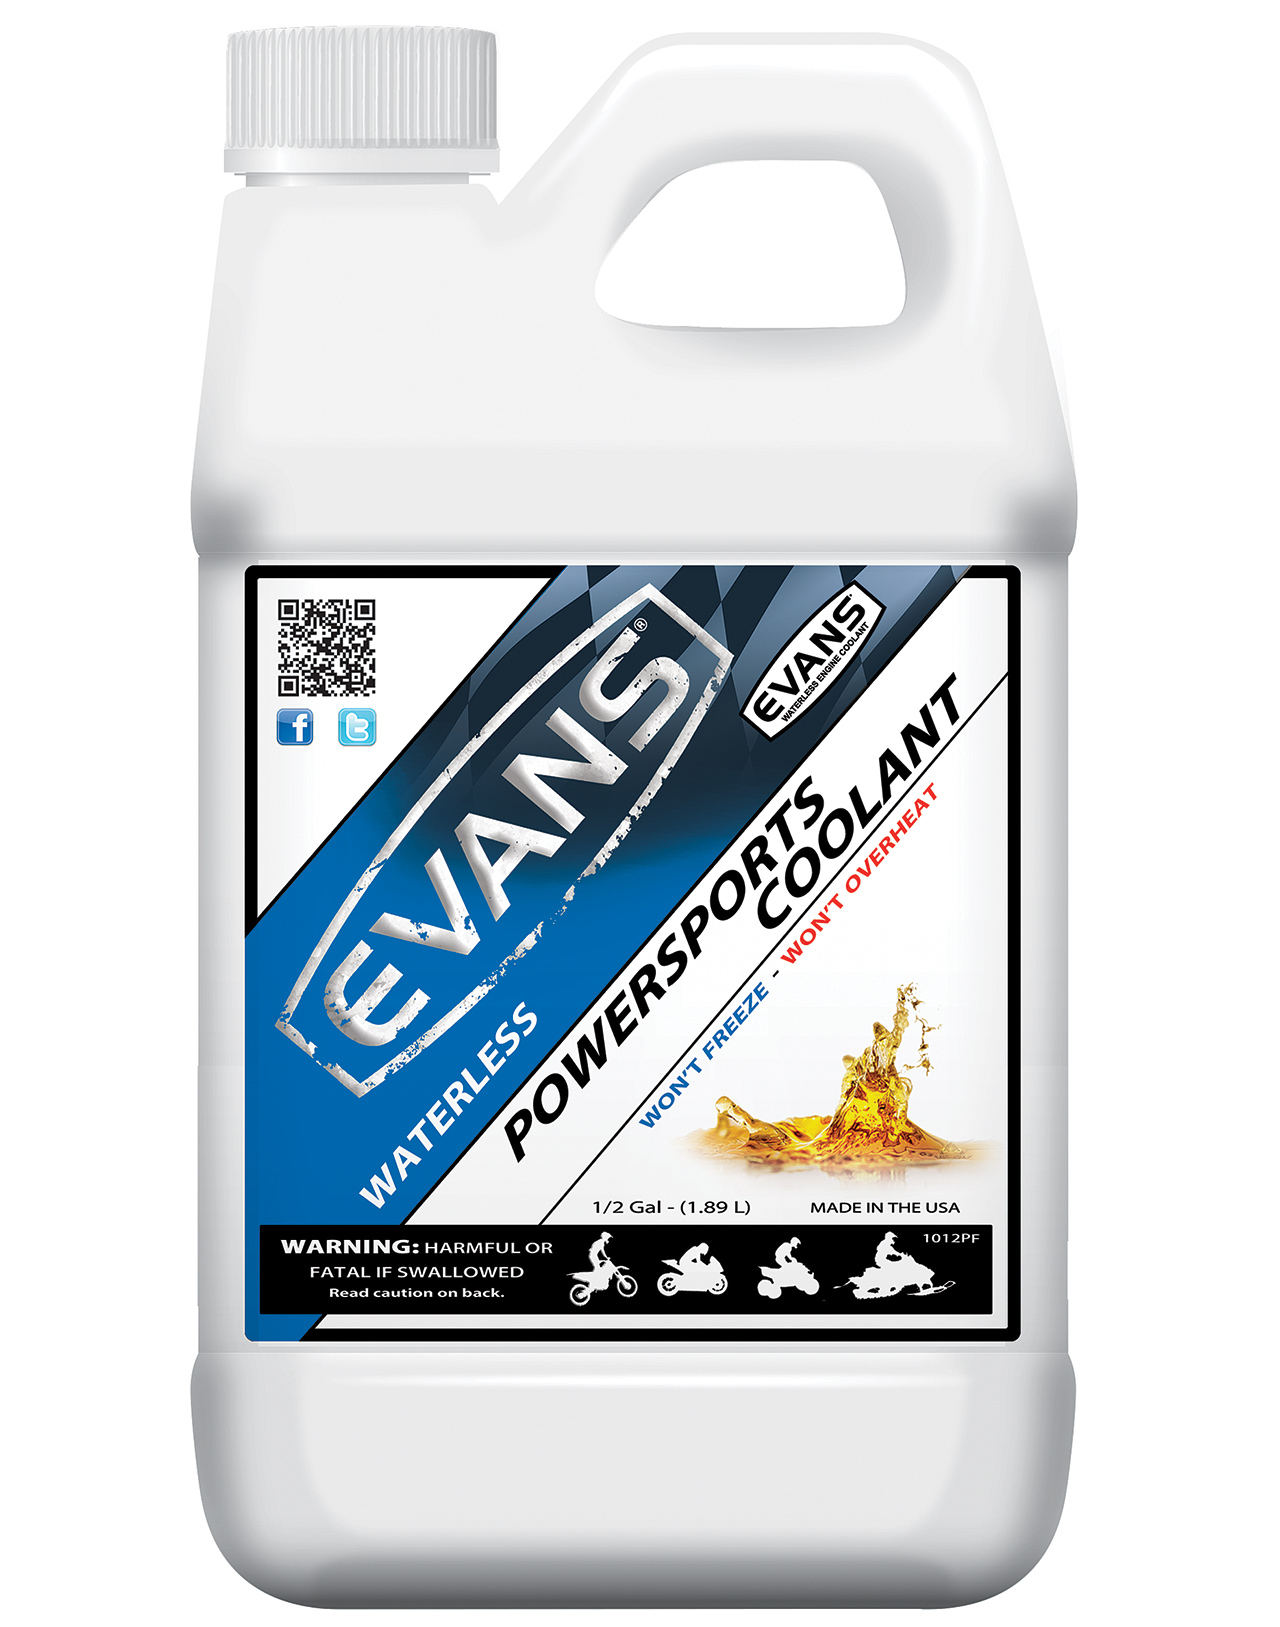 evans cooling products